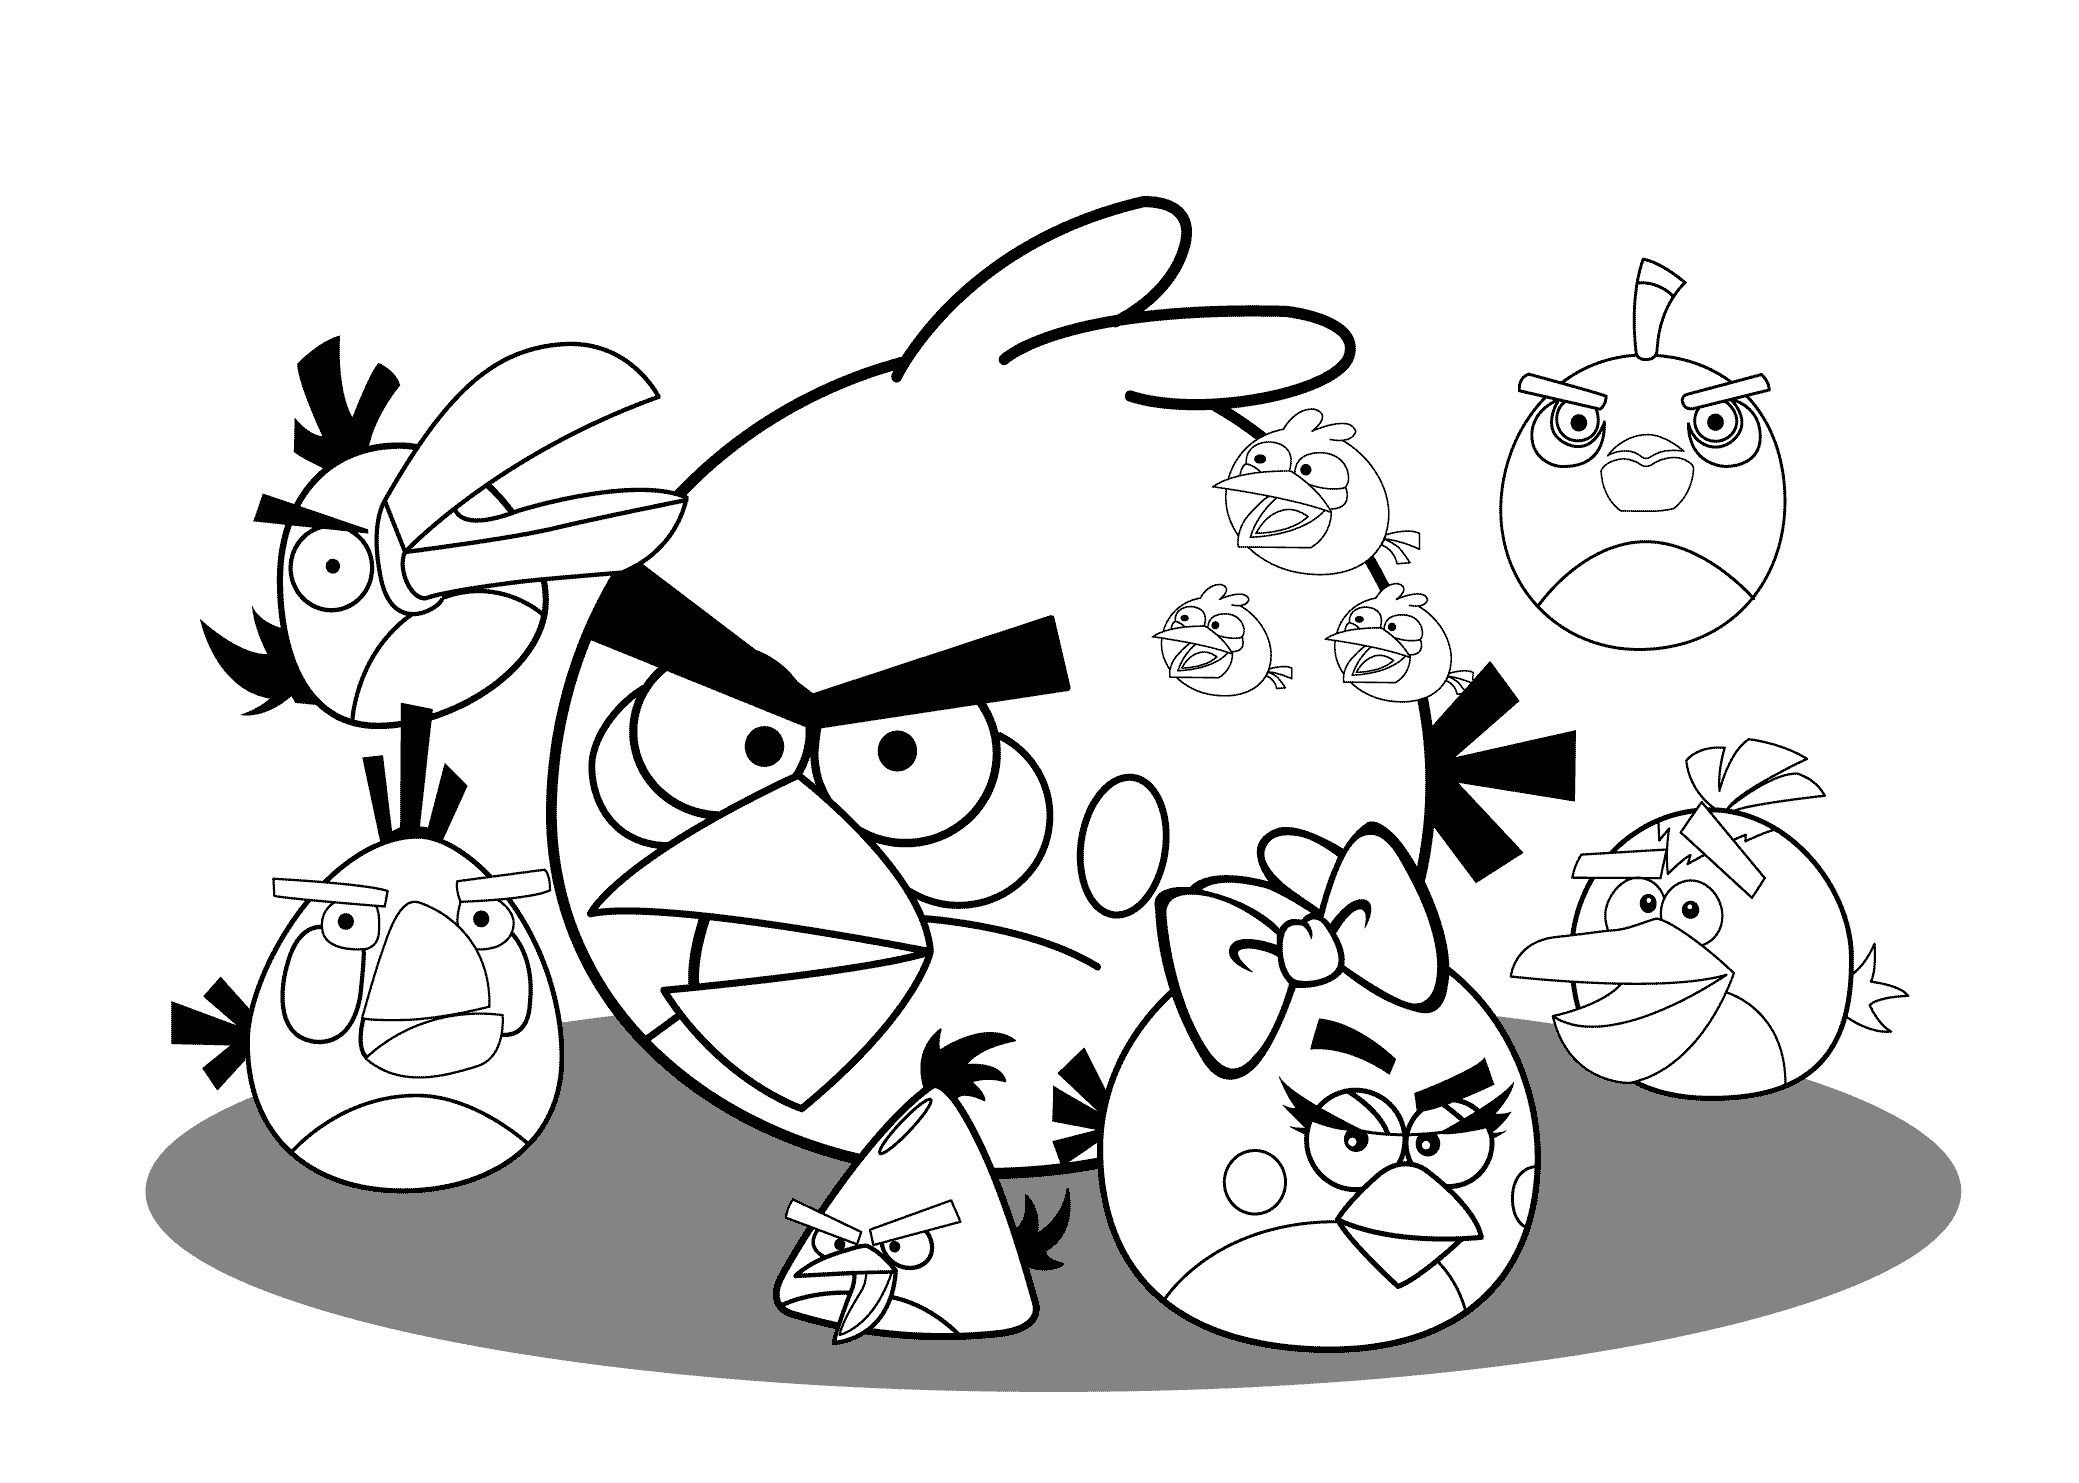 Angry birds coloring pages for kids free printable | coloing-4kids.com